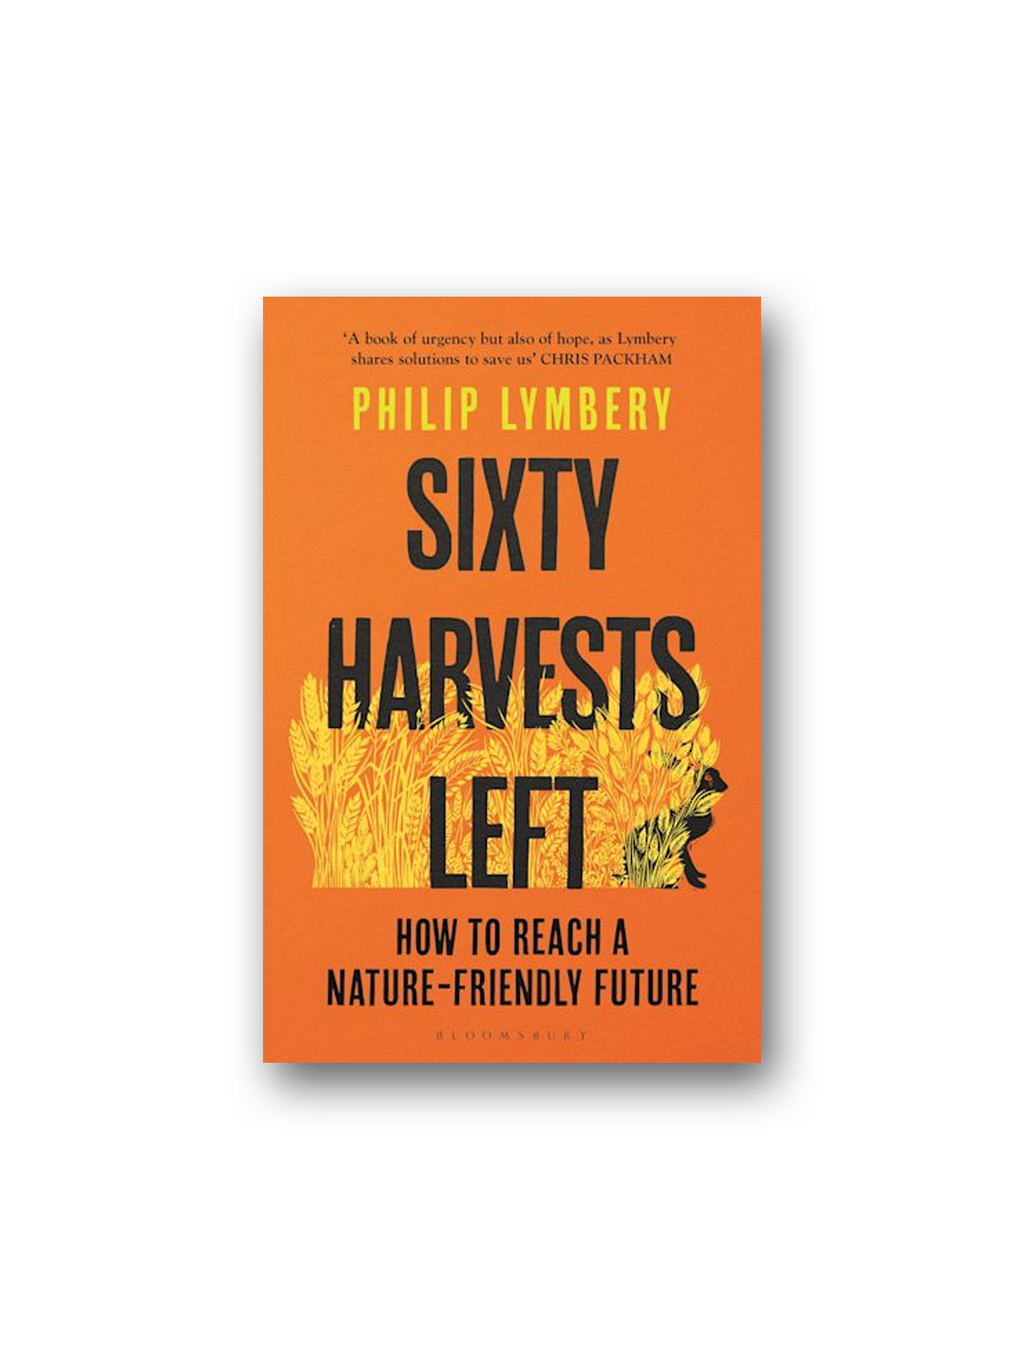 Sixty Harvests Left: How to Reach a Nature-Friendly Future